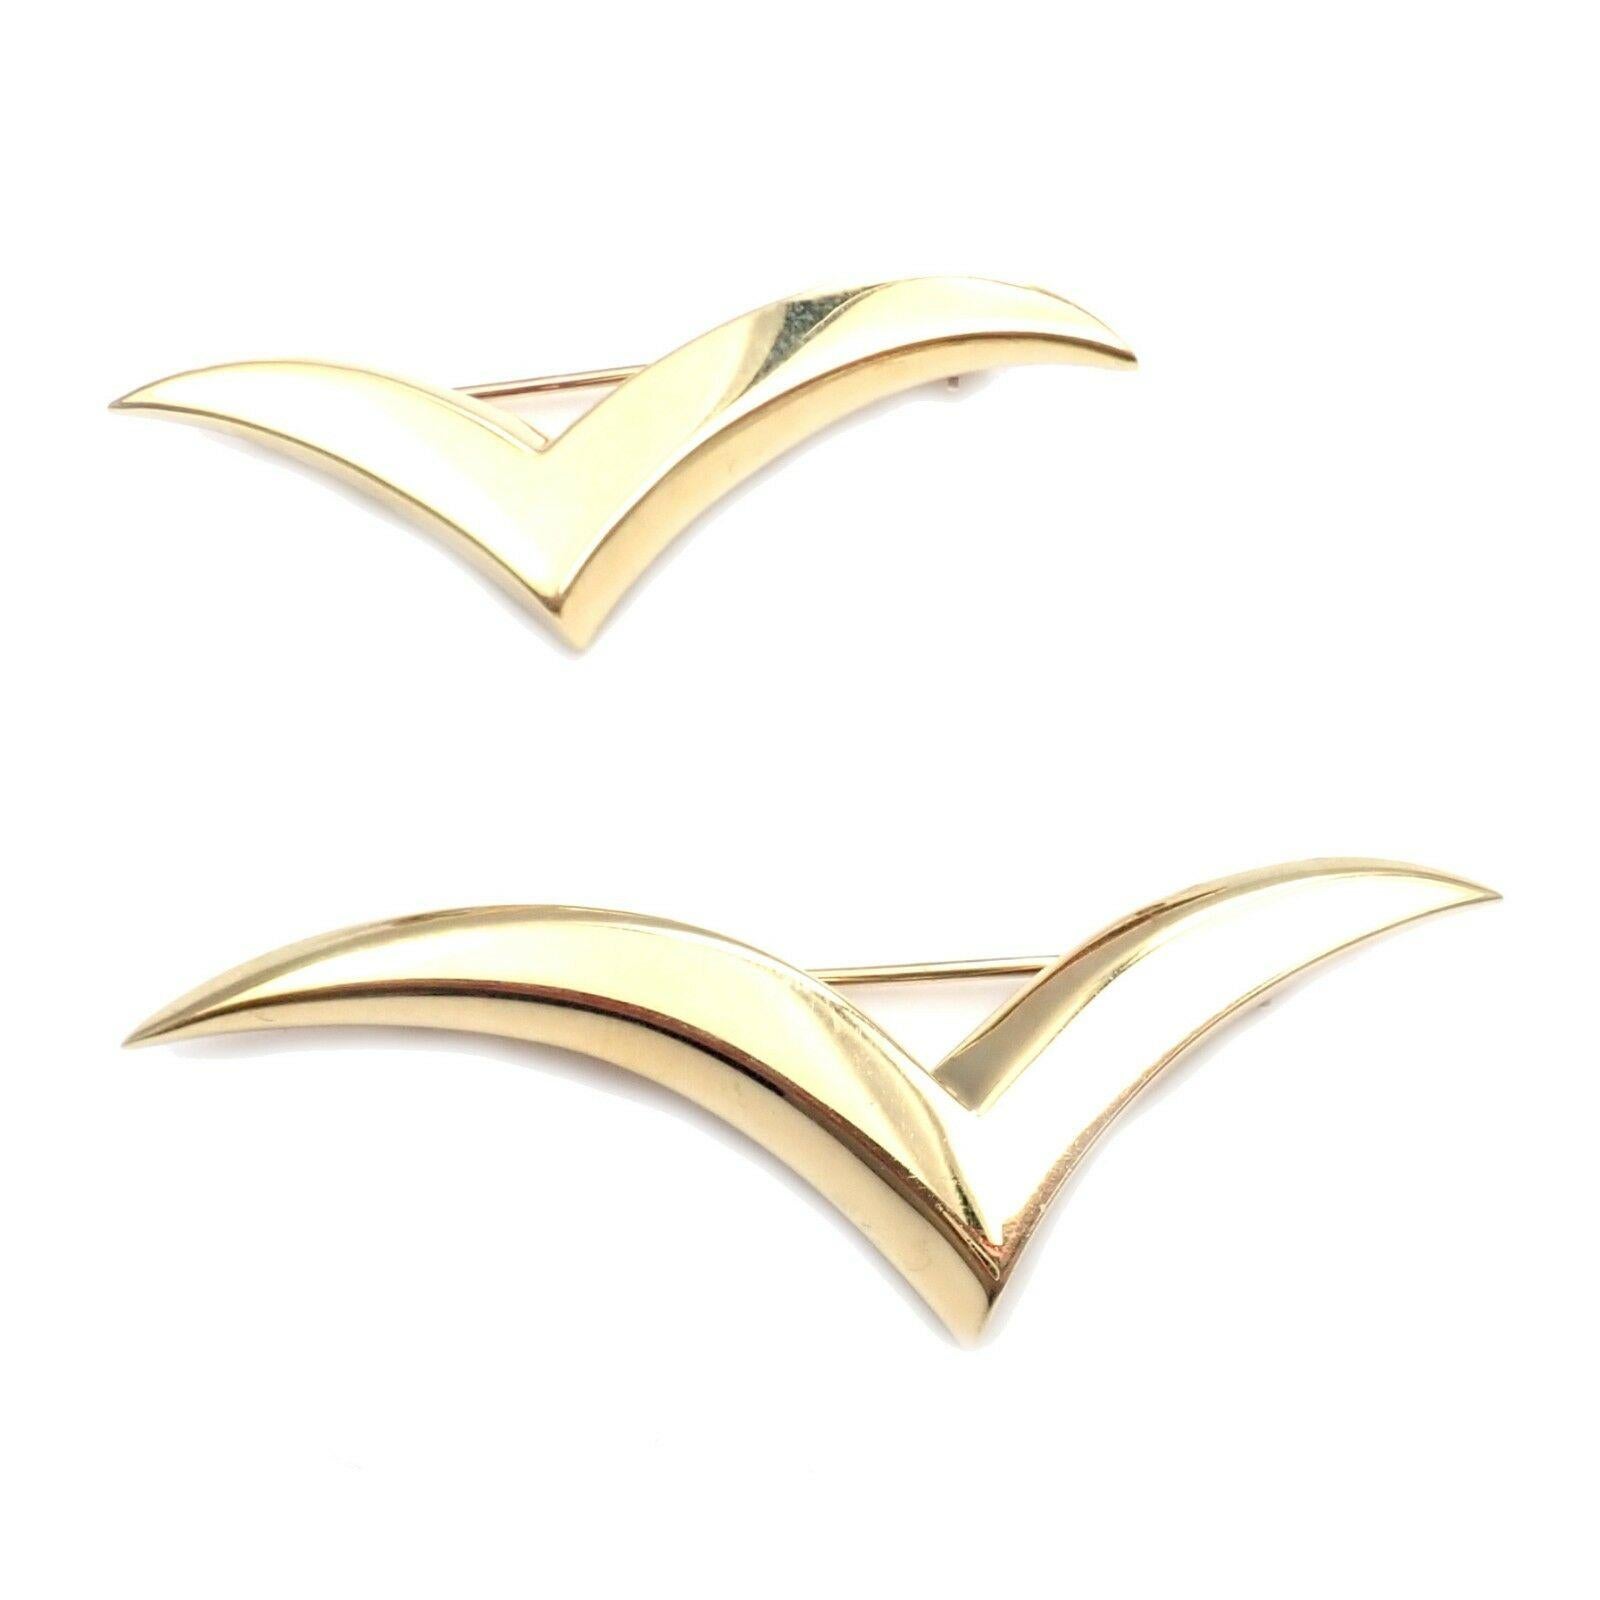 18k Yellow Gold Set of 2 Seagull Brooch Pins by Tiffany & Co. 
Details: 
Measurements:
Bird 1: 53mm x 17mm
Bird 2: 43mm x 14mm
Weight: 
Bird 1: 6.6g
Bird 2: 4.9g
Stamped Hallmarks: Tiffany & Co 750
*Free Shipping within the United States*
YOUR